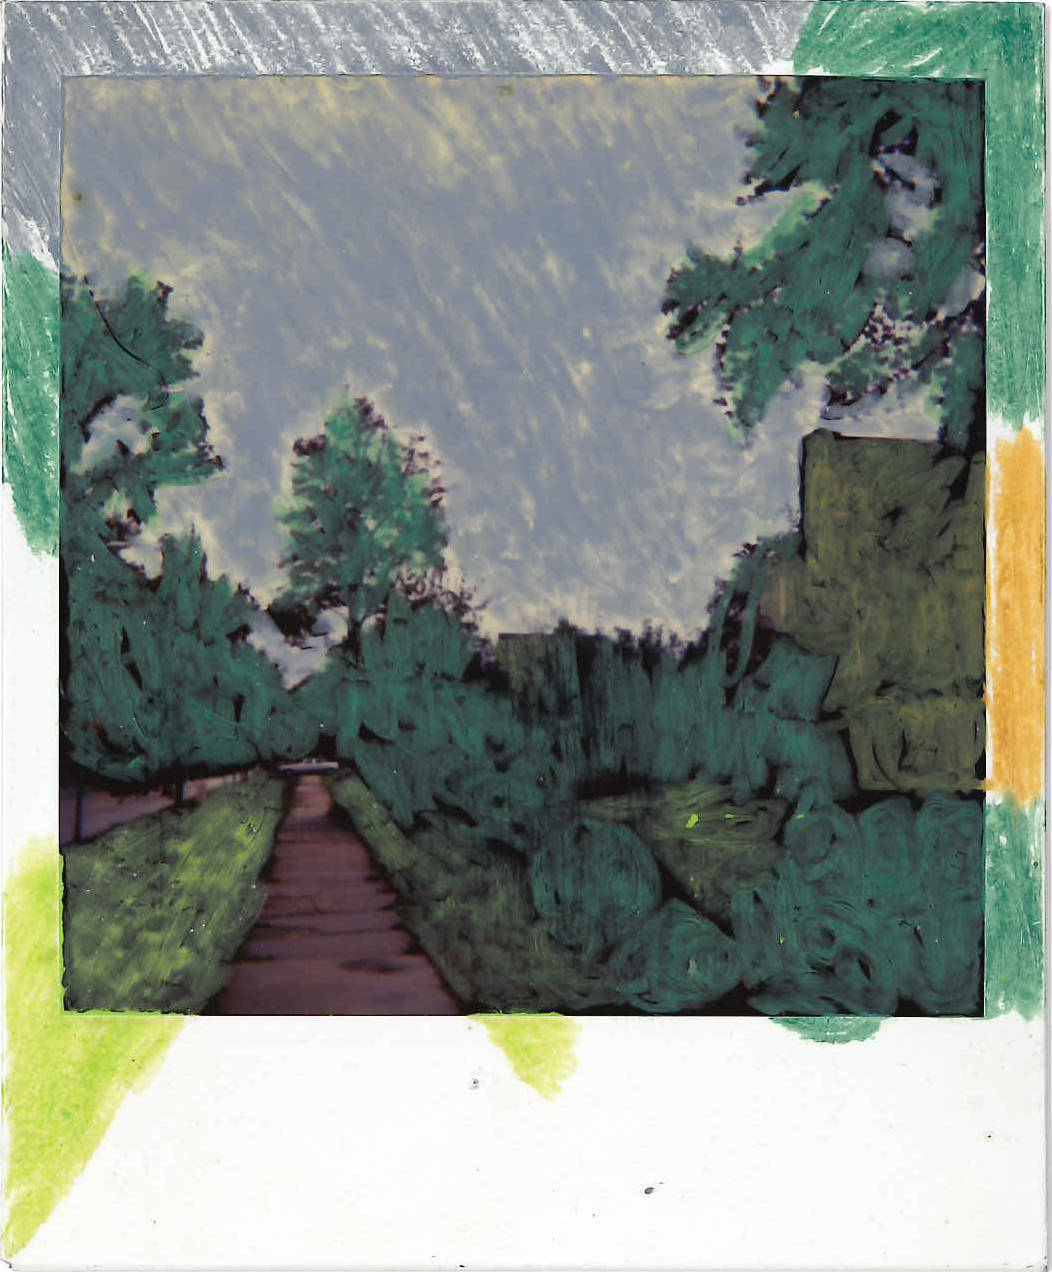 An example of the “Painterly” Polaroids. From the collection of Robert E. Jackson